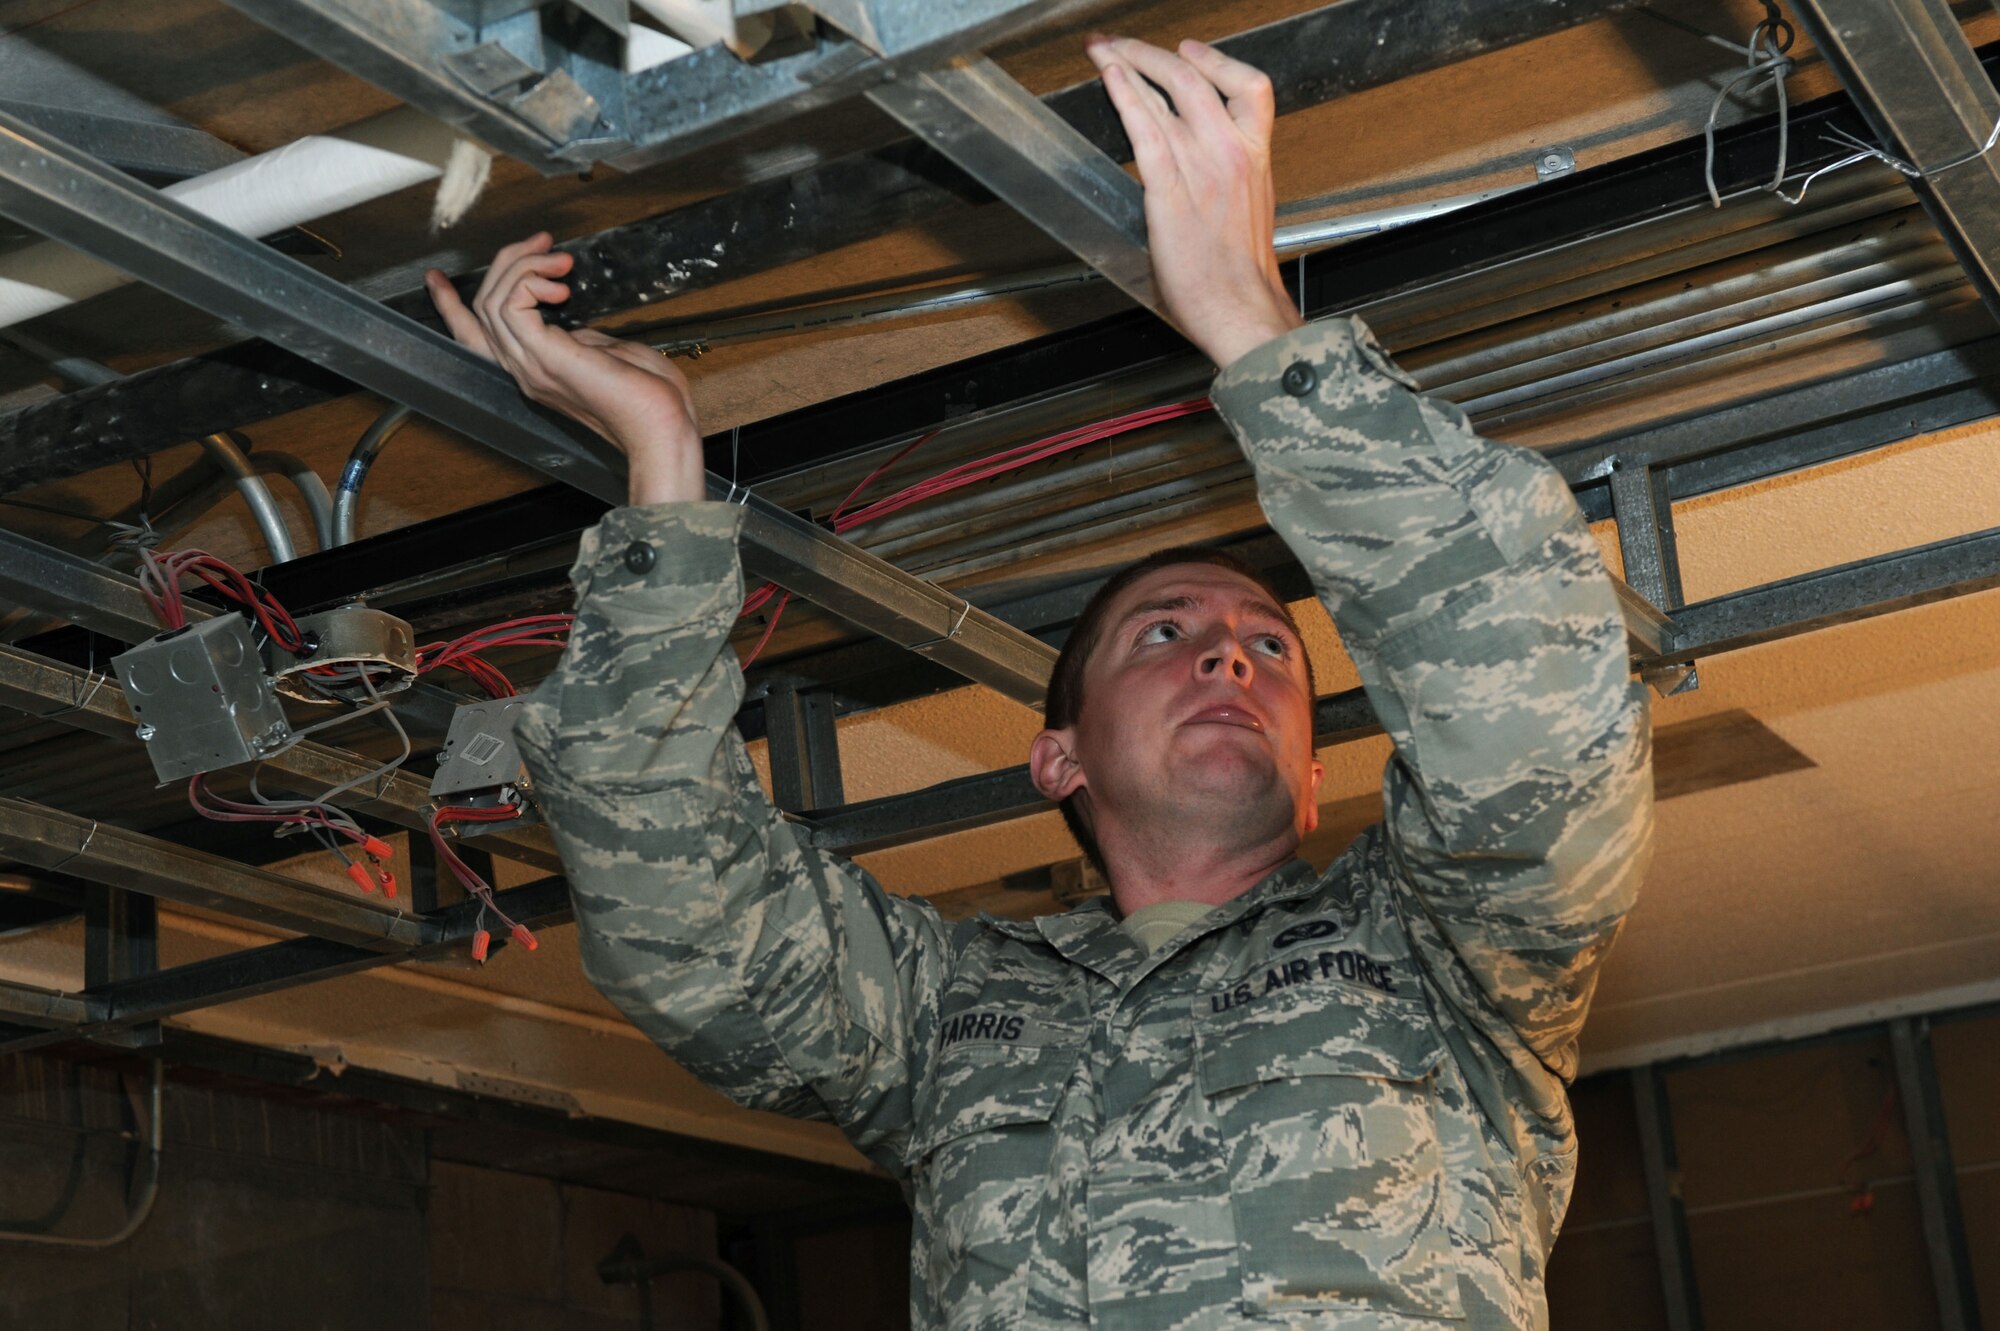 Senior Airman Jesse Farris, 28th Civil Engineer Squadron Water and Fuel System Maintenance journeyman, removes an old drain pipe from the ceiling in Borglum Hall on Ellsworth Air Force Base, S.D., Oct. 9, 2014. Airmen belonging to the WFSM section of the 28th CES are responsible for not only maintaining drain pipes, sewer lines and sprinkler systems but also the hydrogen fuel systems of Ellsworth’s aircraft. (U.S. Air Force photo by Senior Airman Hailey R. Staker/Released)  